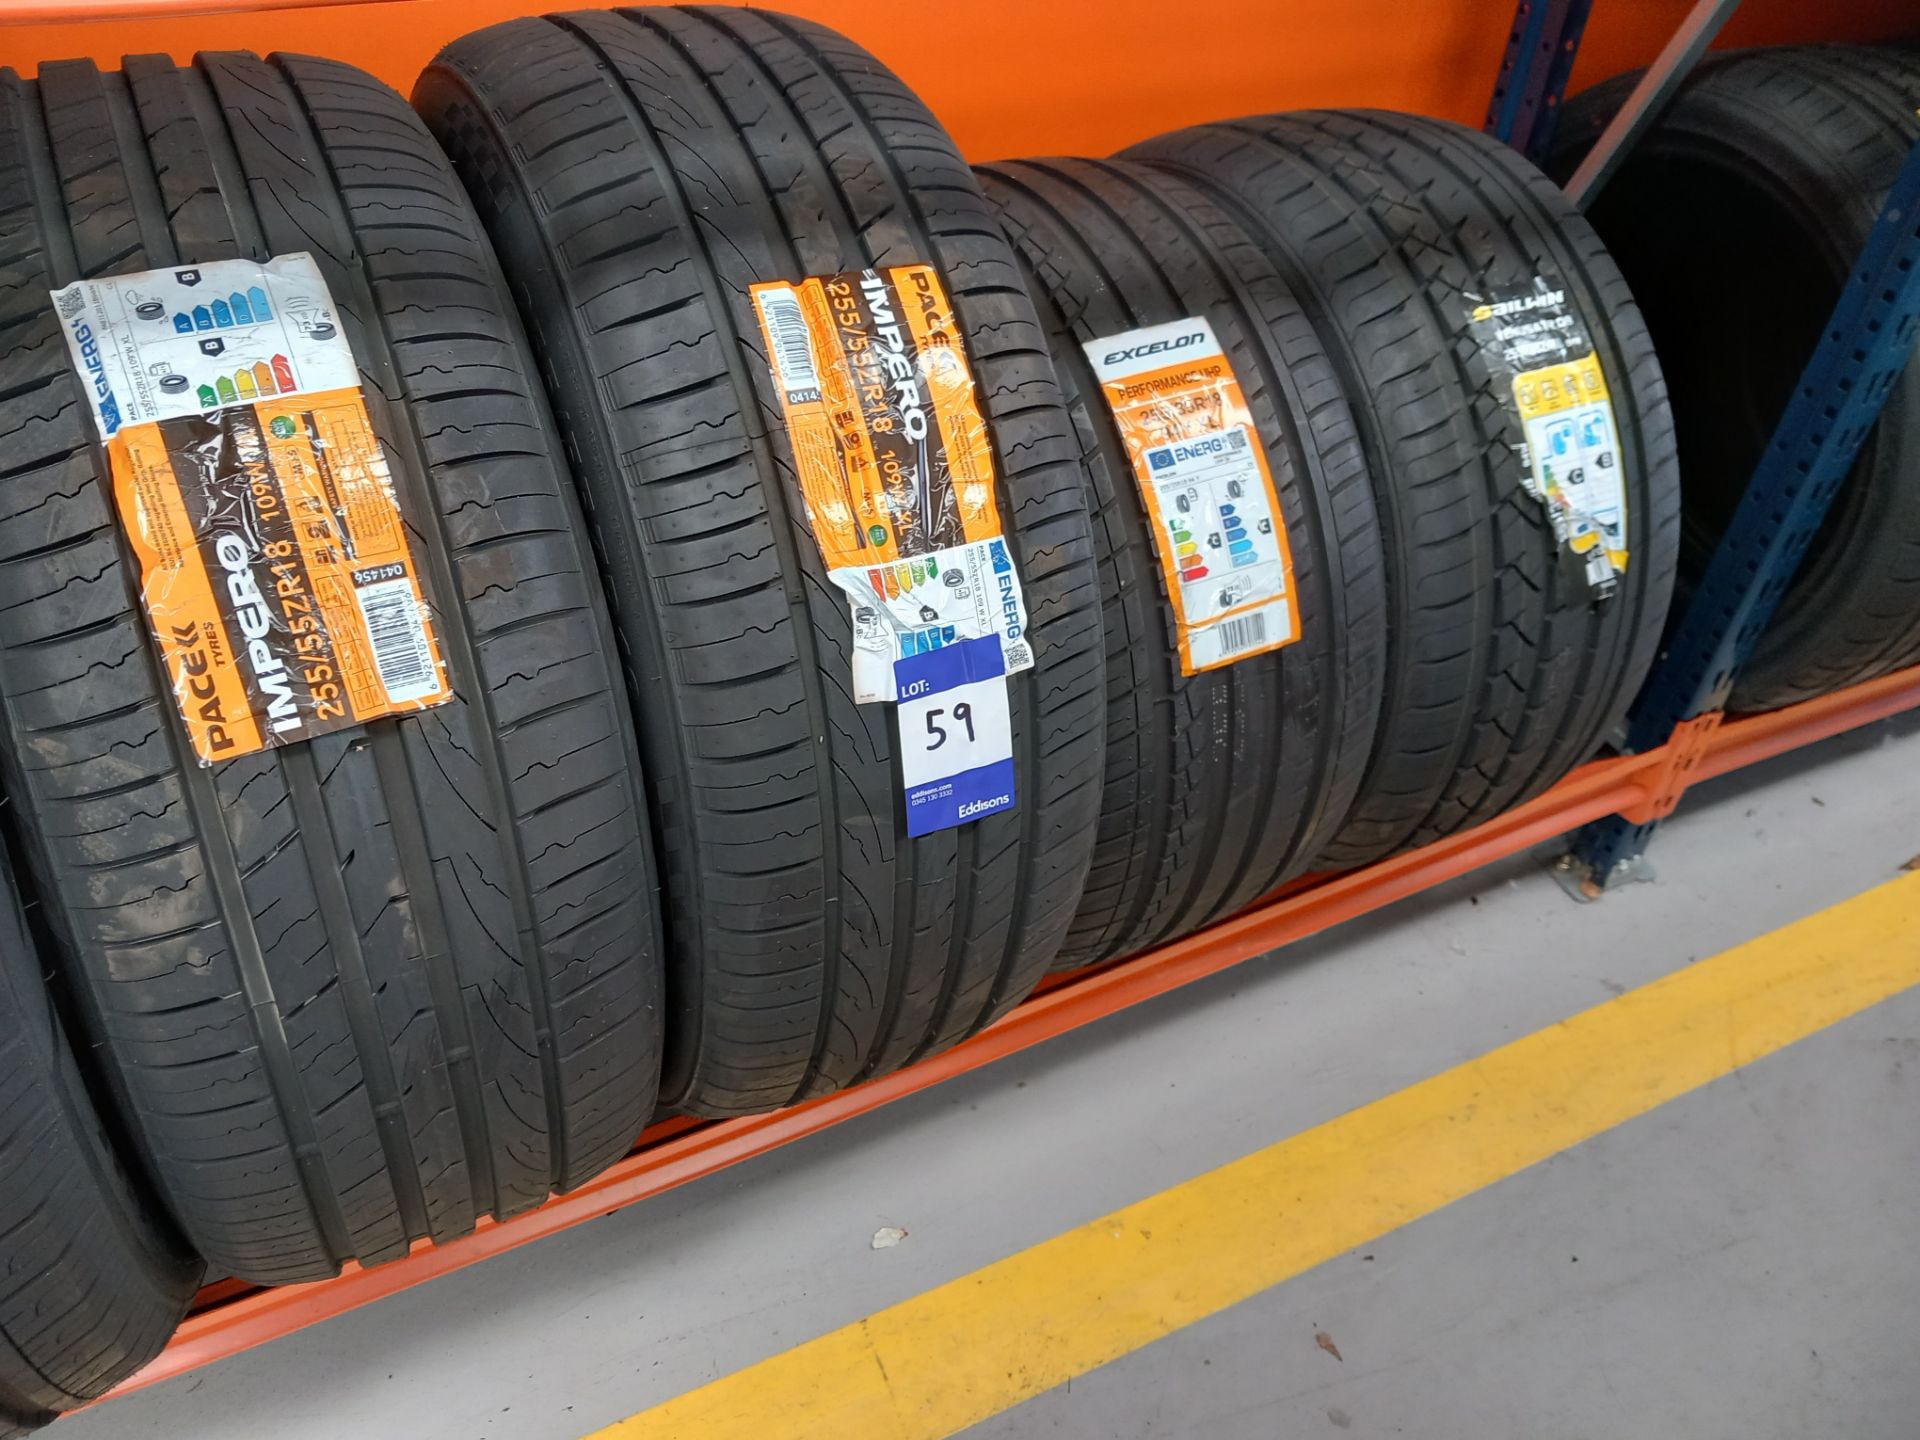 2 Pace 255/55 18 tyres - This is a Composite lot made up of Lots 1 - 96 inclusive. At the end of the